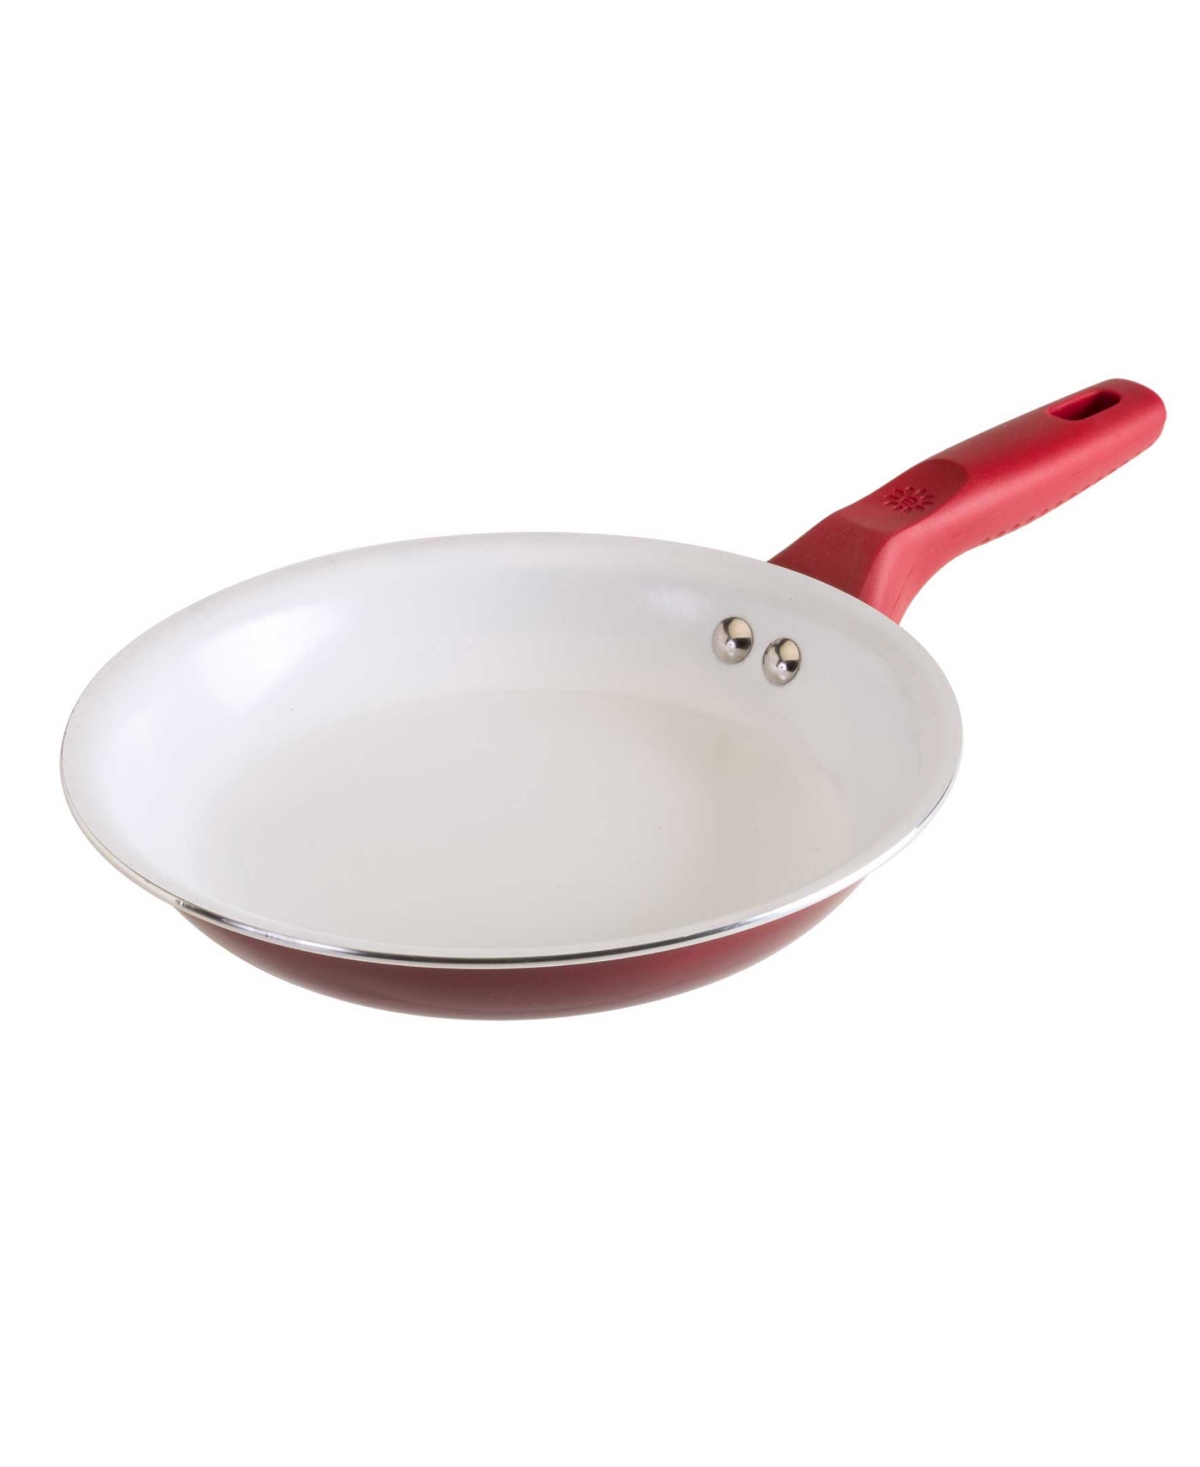 Ecolution Aluminum 8" Bliss Non-stick Fry Pan In Red